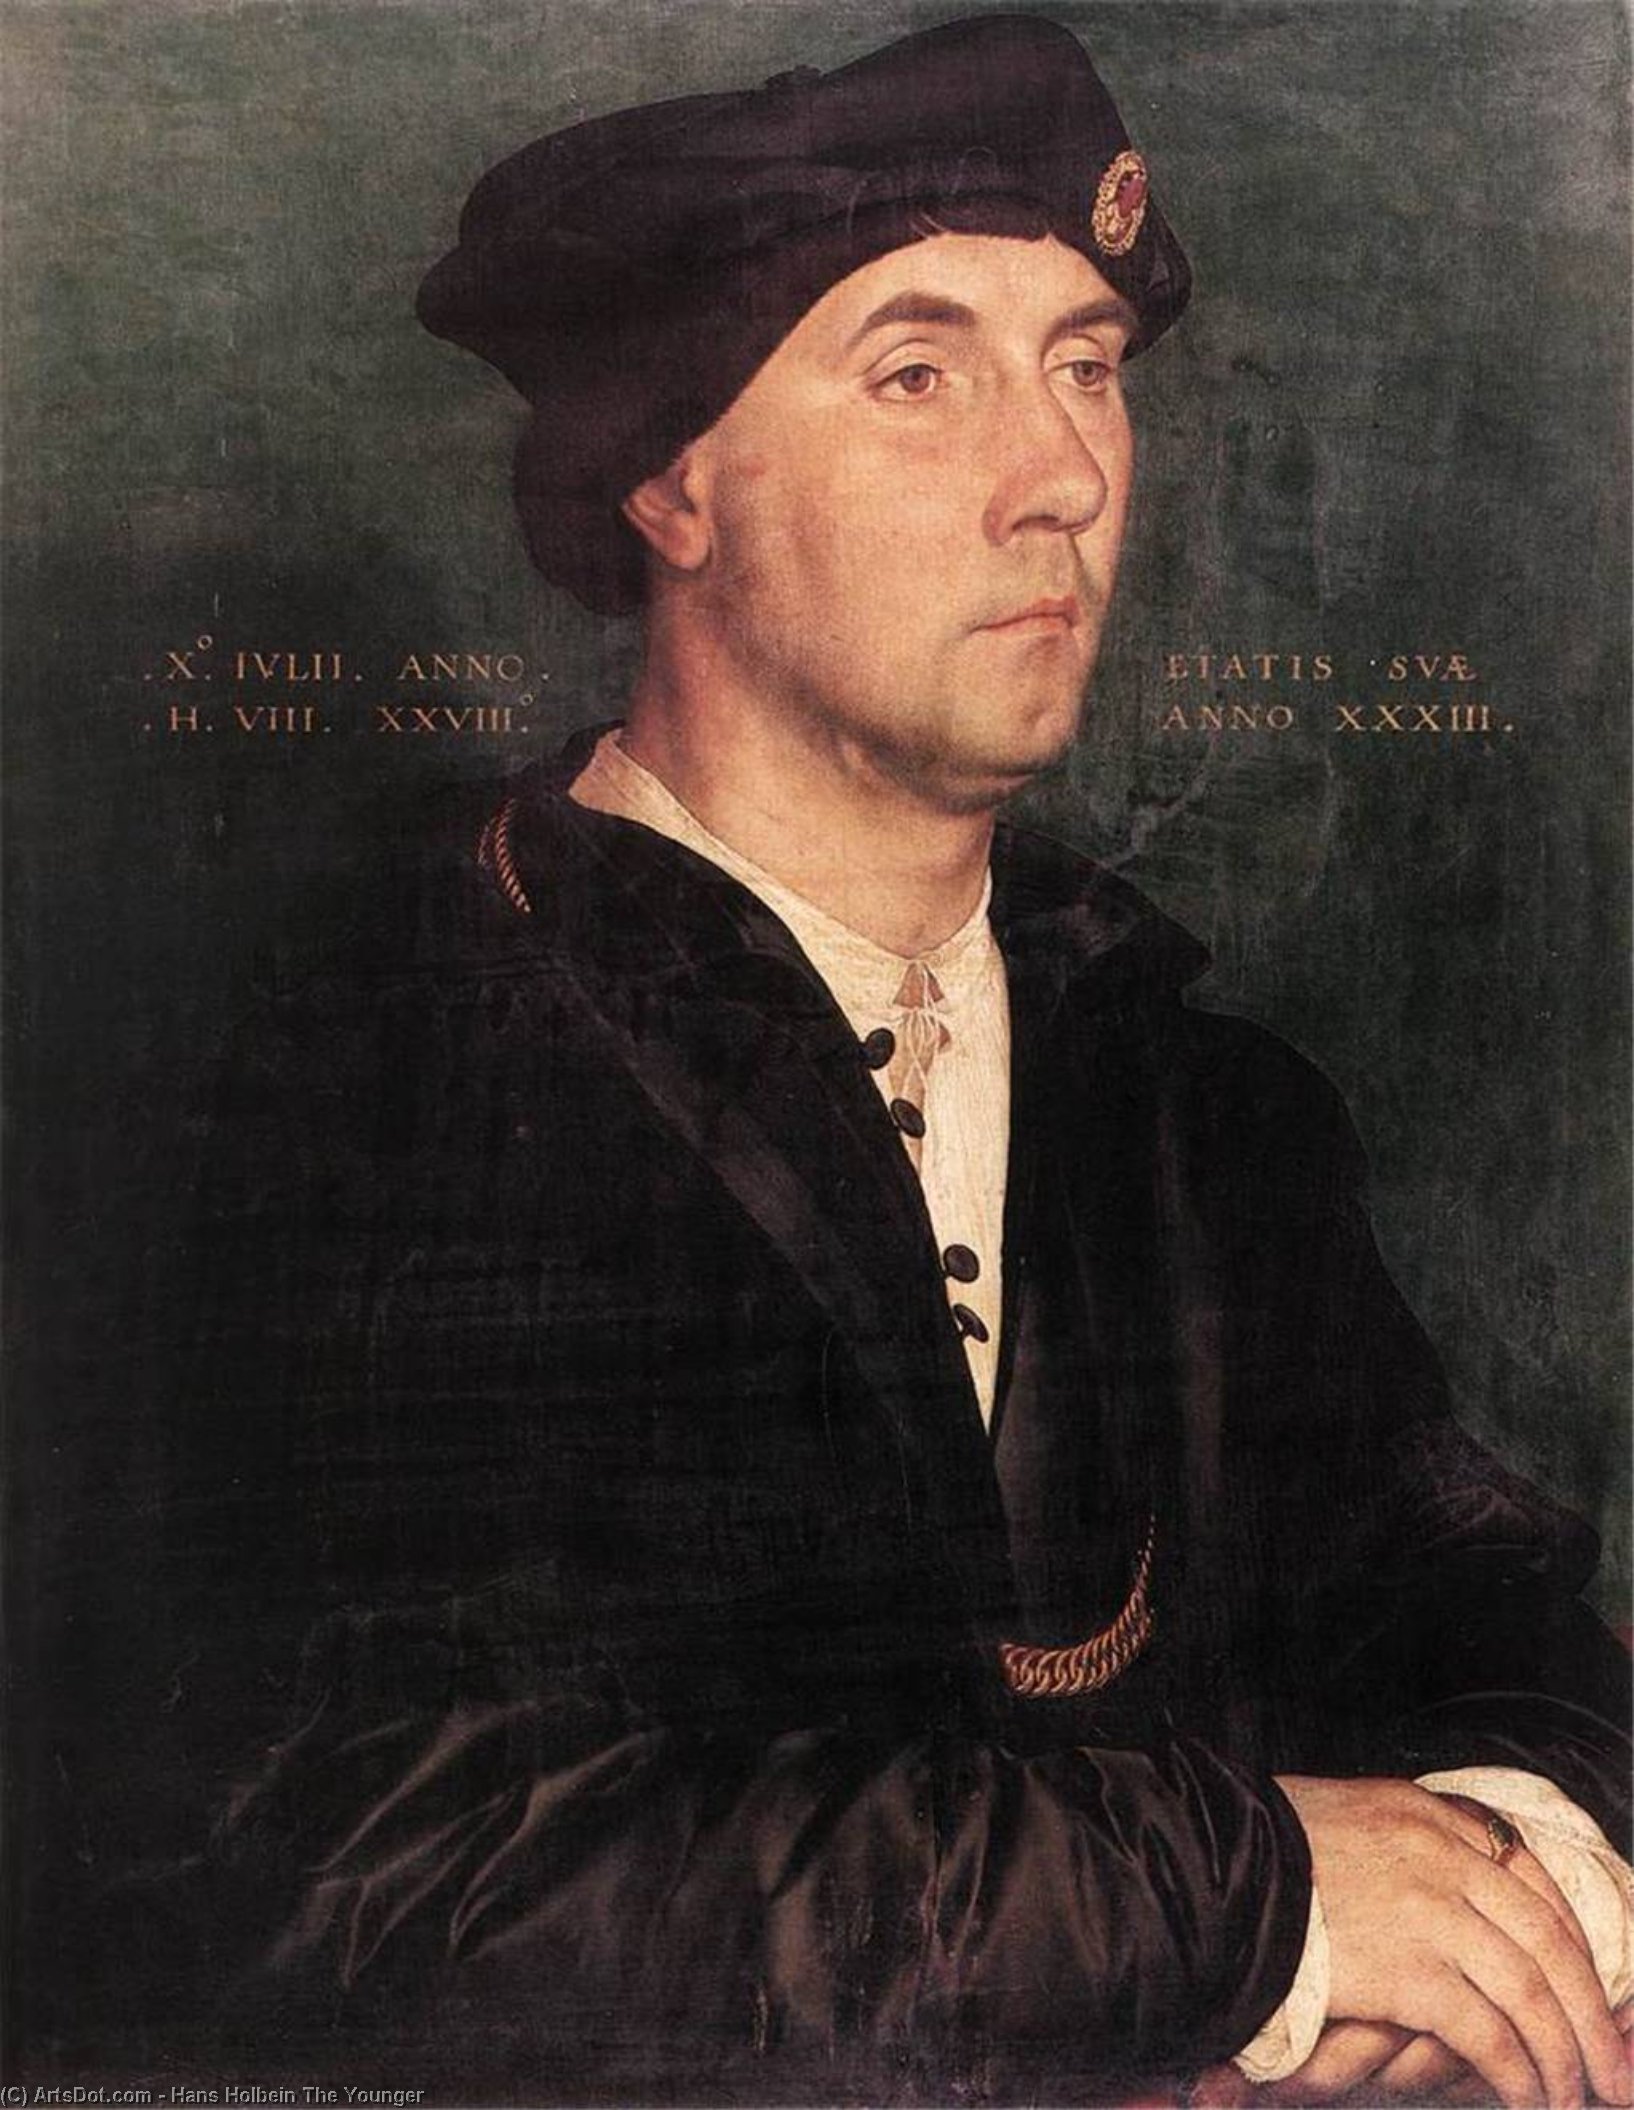 WikiOO.org – 美術百科全書 - 繪畫，作品 Hans Holbein The Younger - 理查德·绍斯韦尔爵士